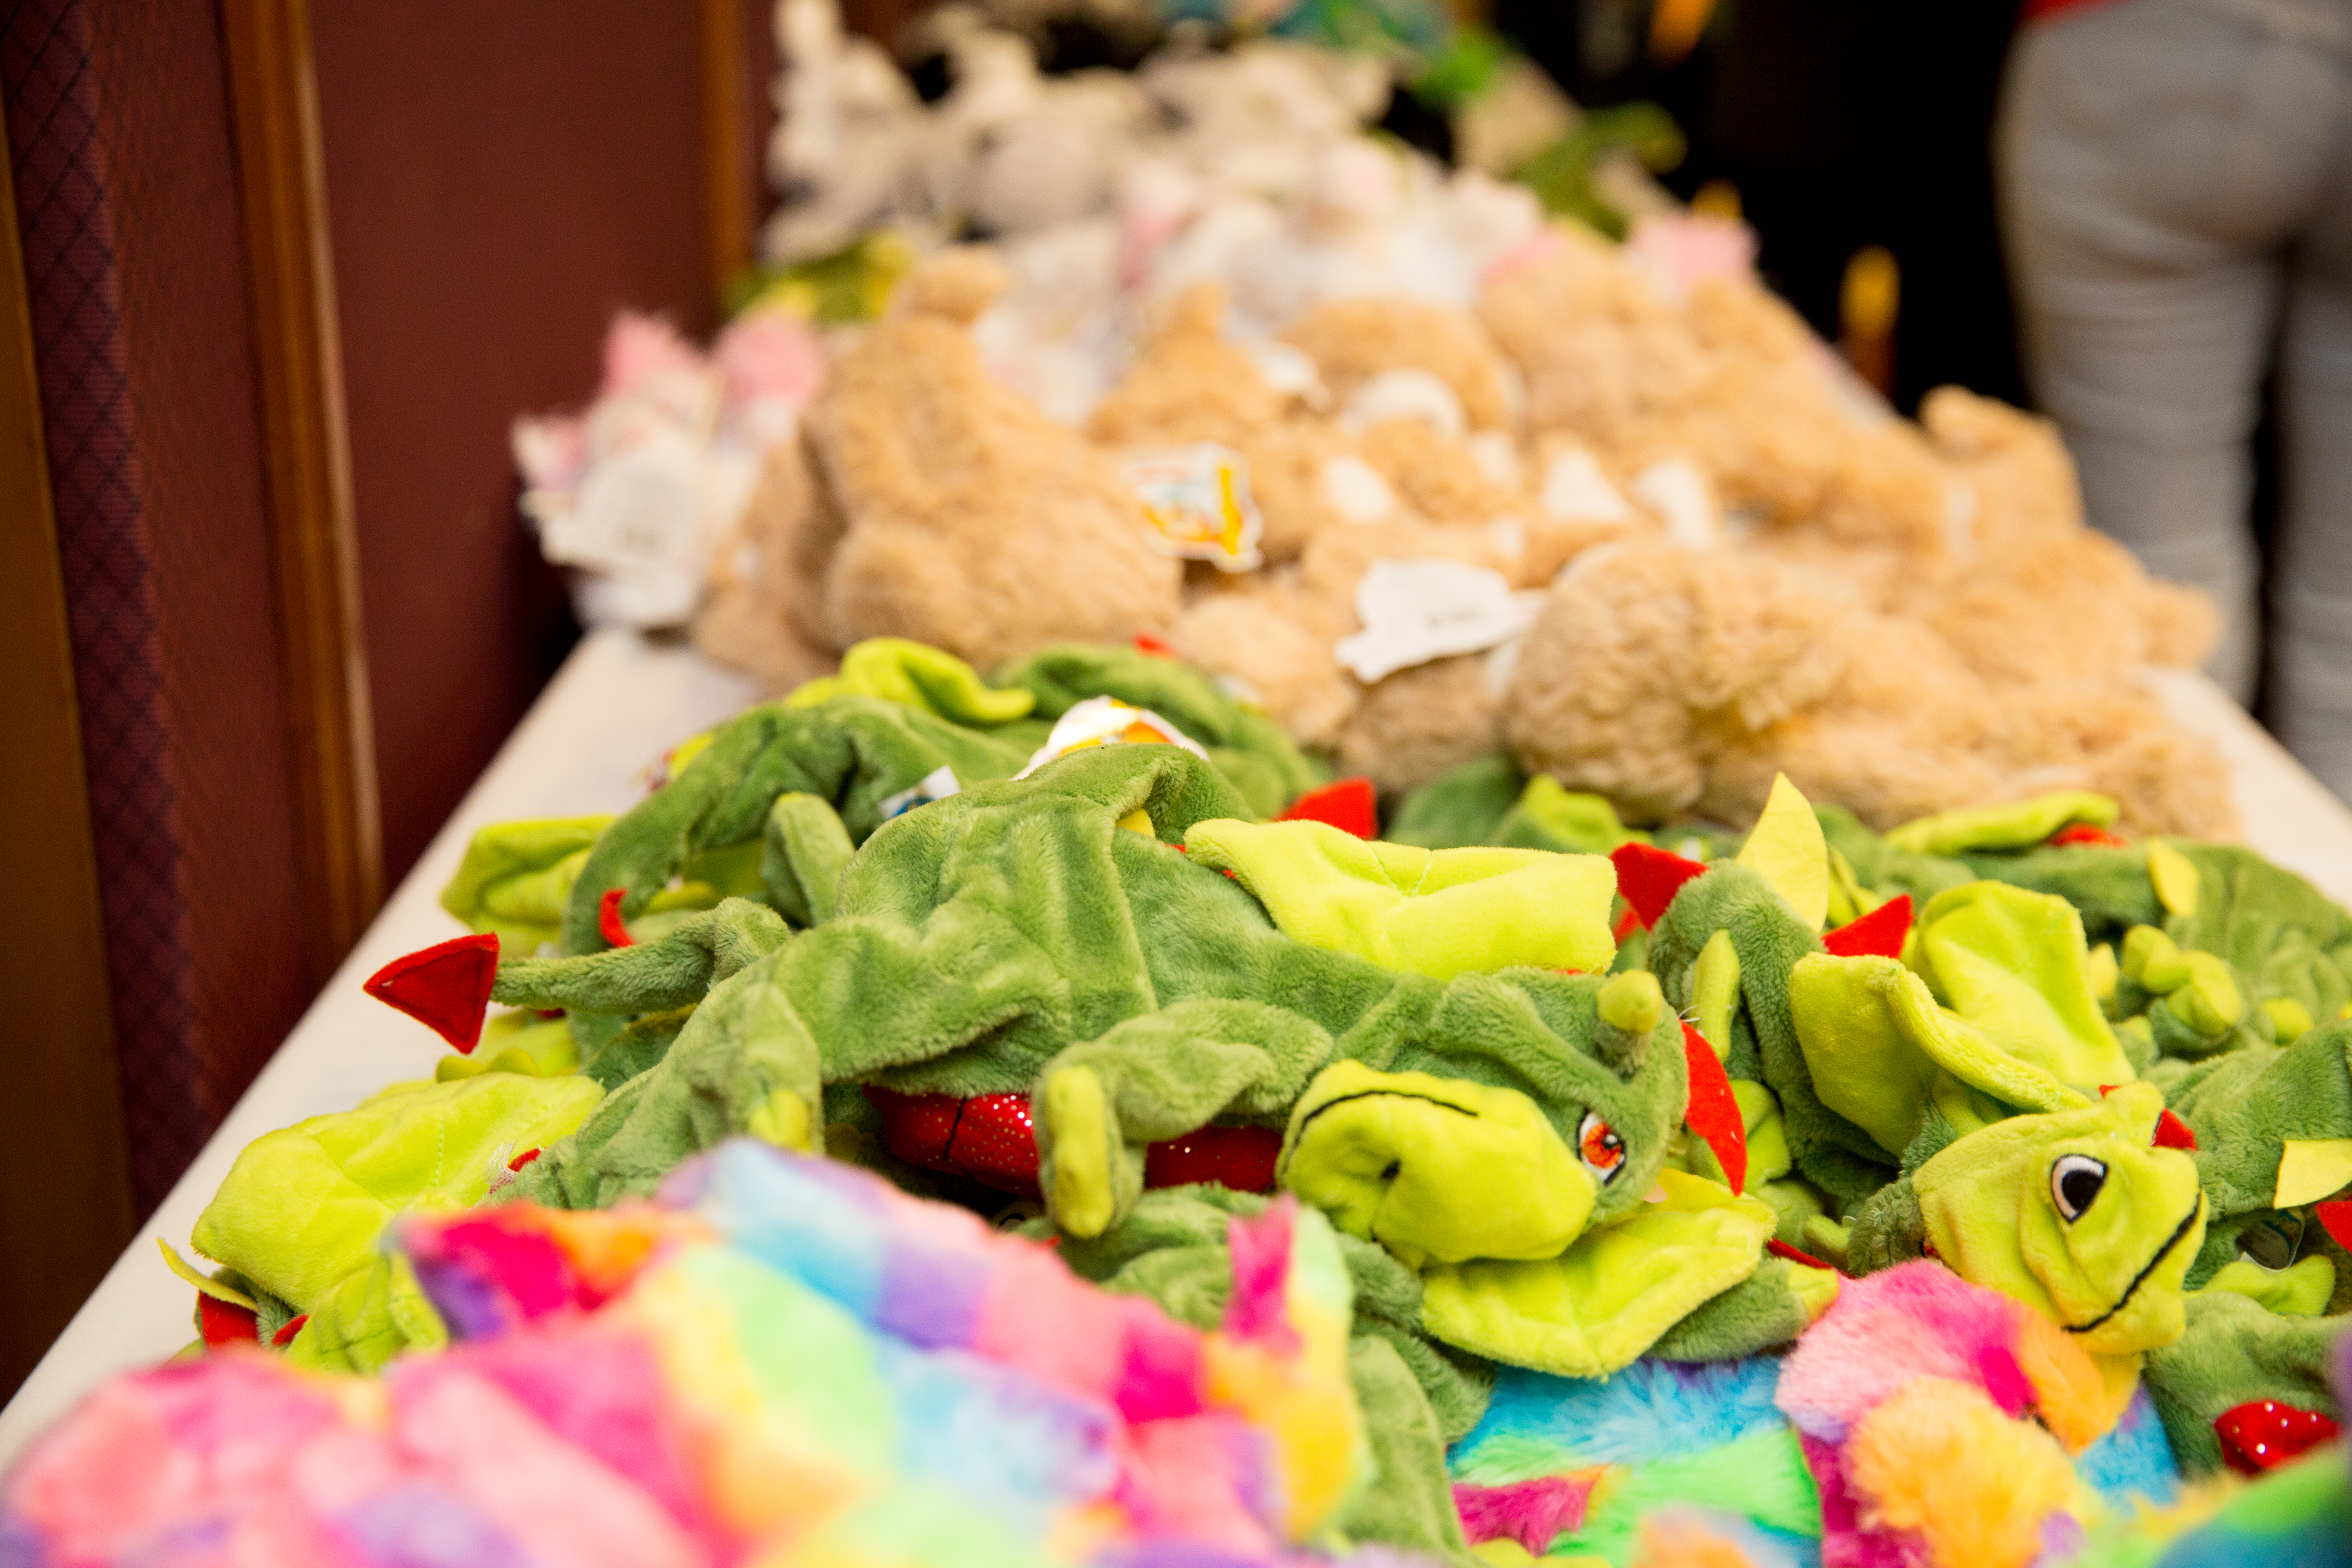 Stuffed animals (waiting to be filled) from Shamrock Fest